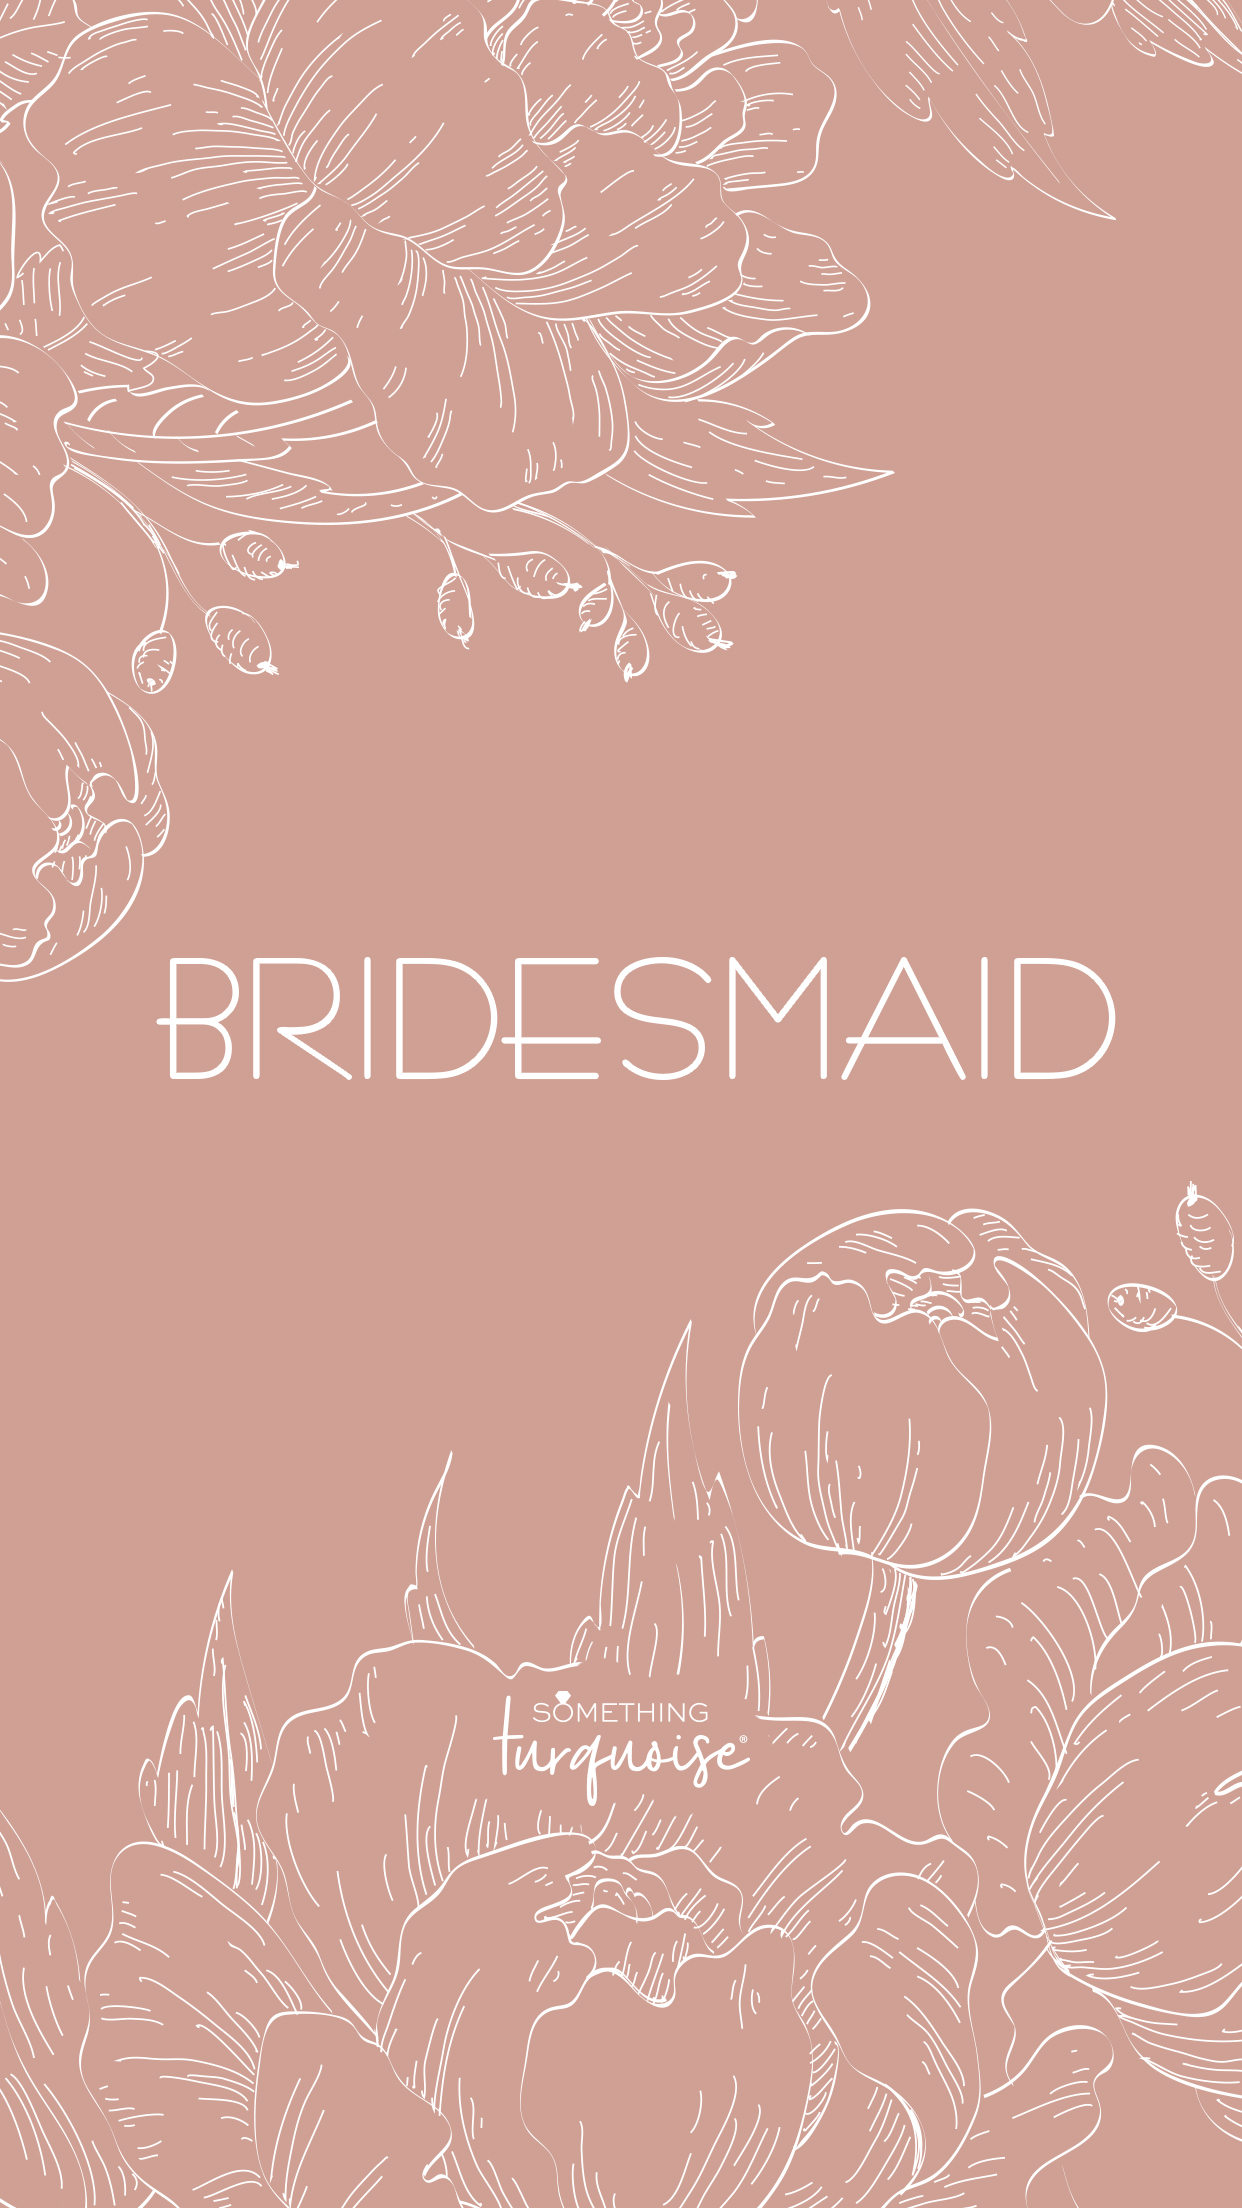 Free floral phone wallpaper for the Bridesmaids!